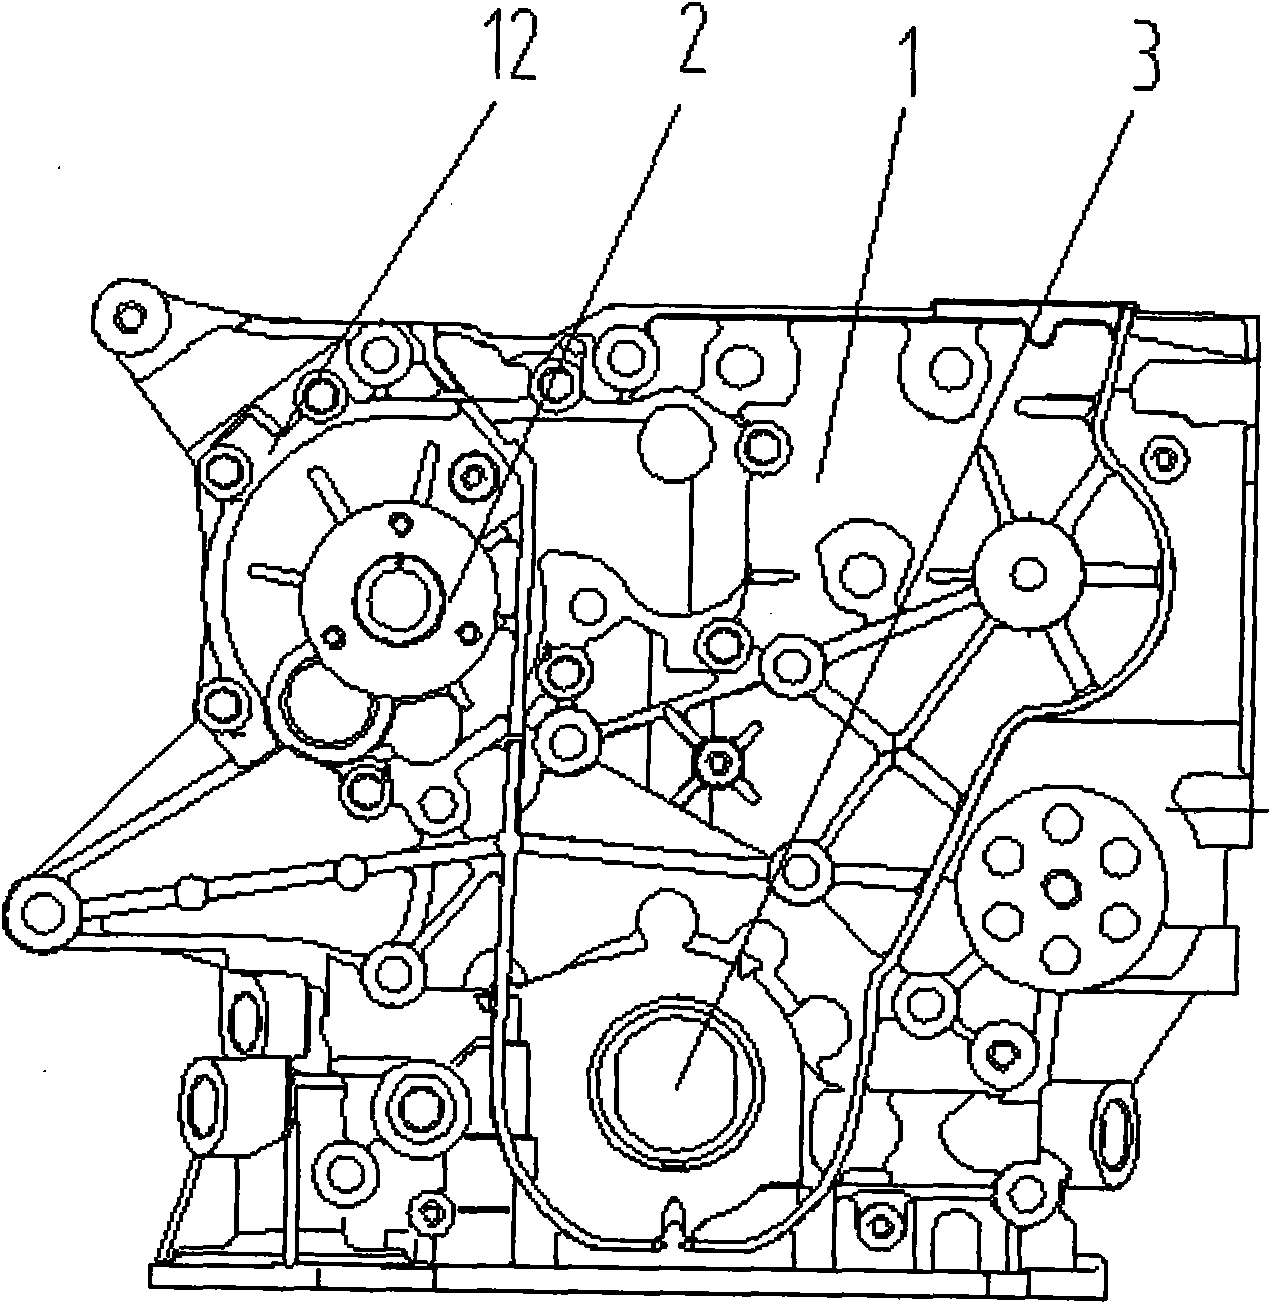 Front end cover assembly for integrated lubrication cooling power pump of engine